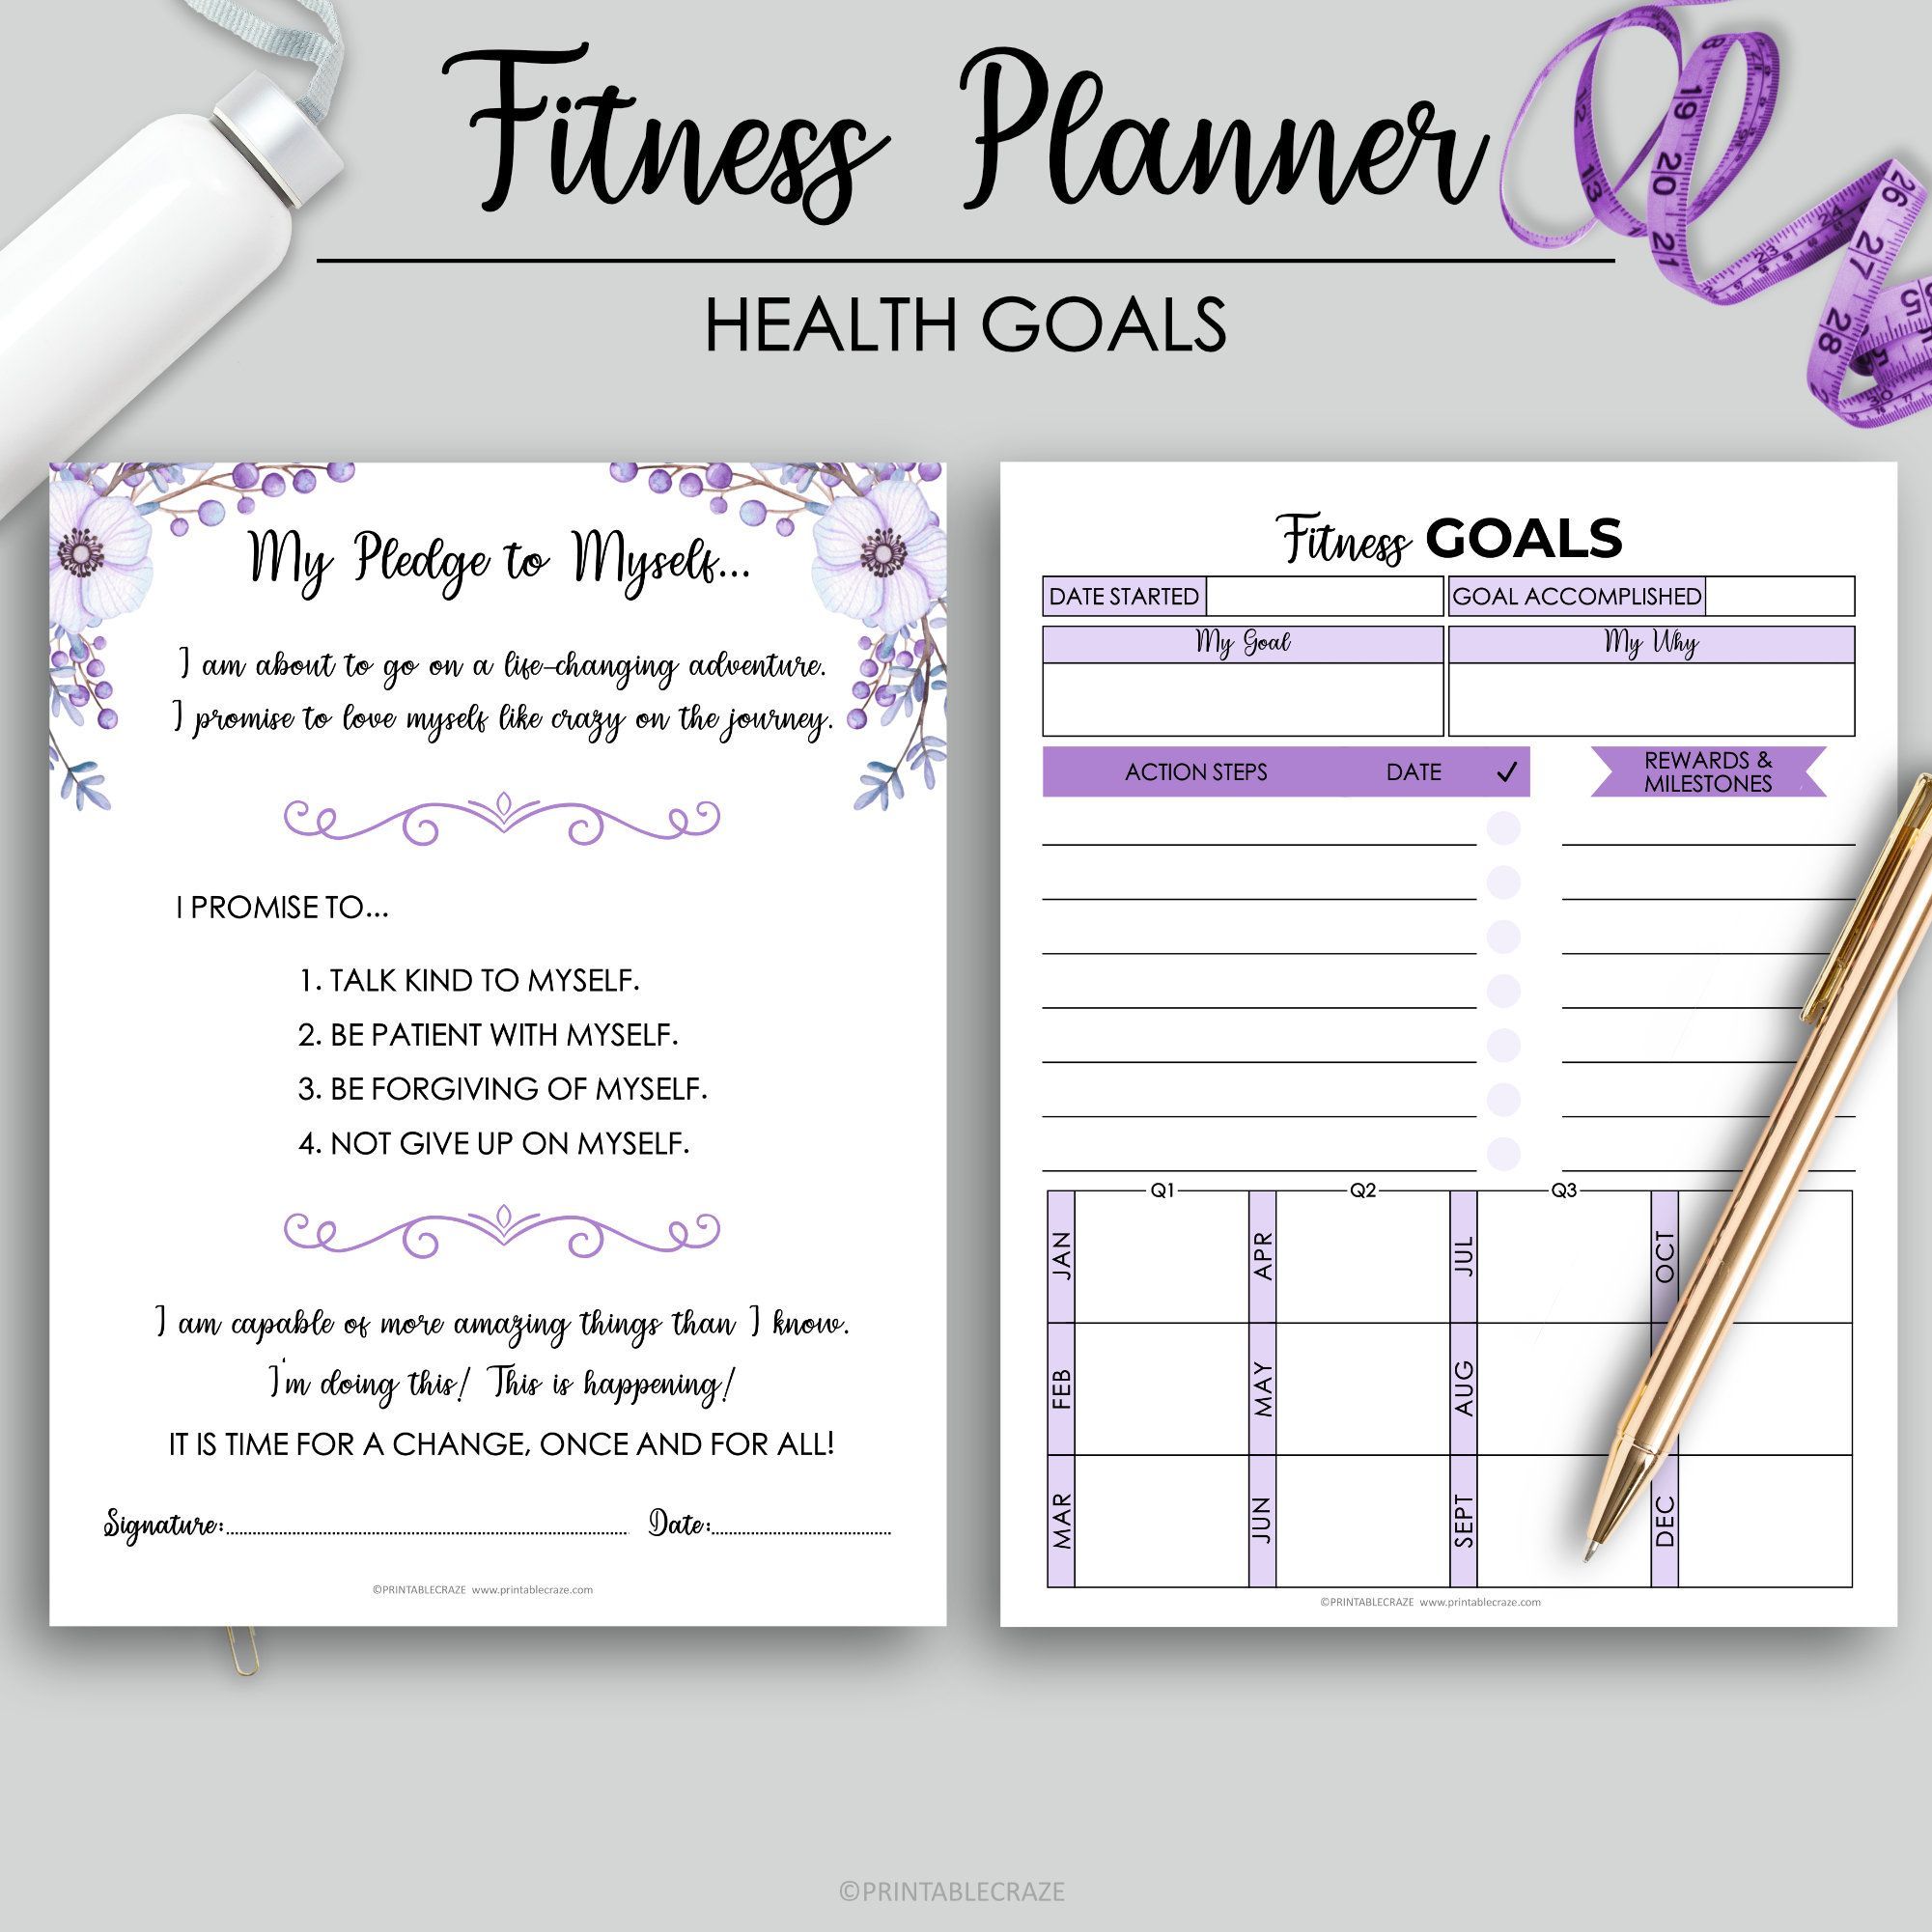 Fitness Planner Printable Weight Loss Health Planner Fitness Journal Workout Log Food Diary Calorie Tracker Daily Weight Loss Step Tracker -   fitness Planner pages